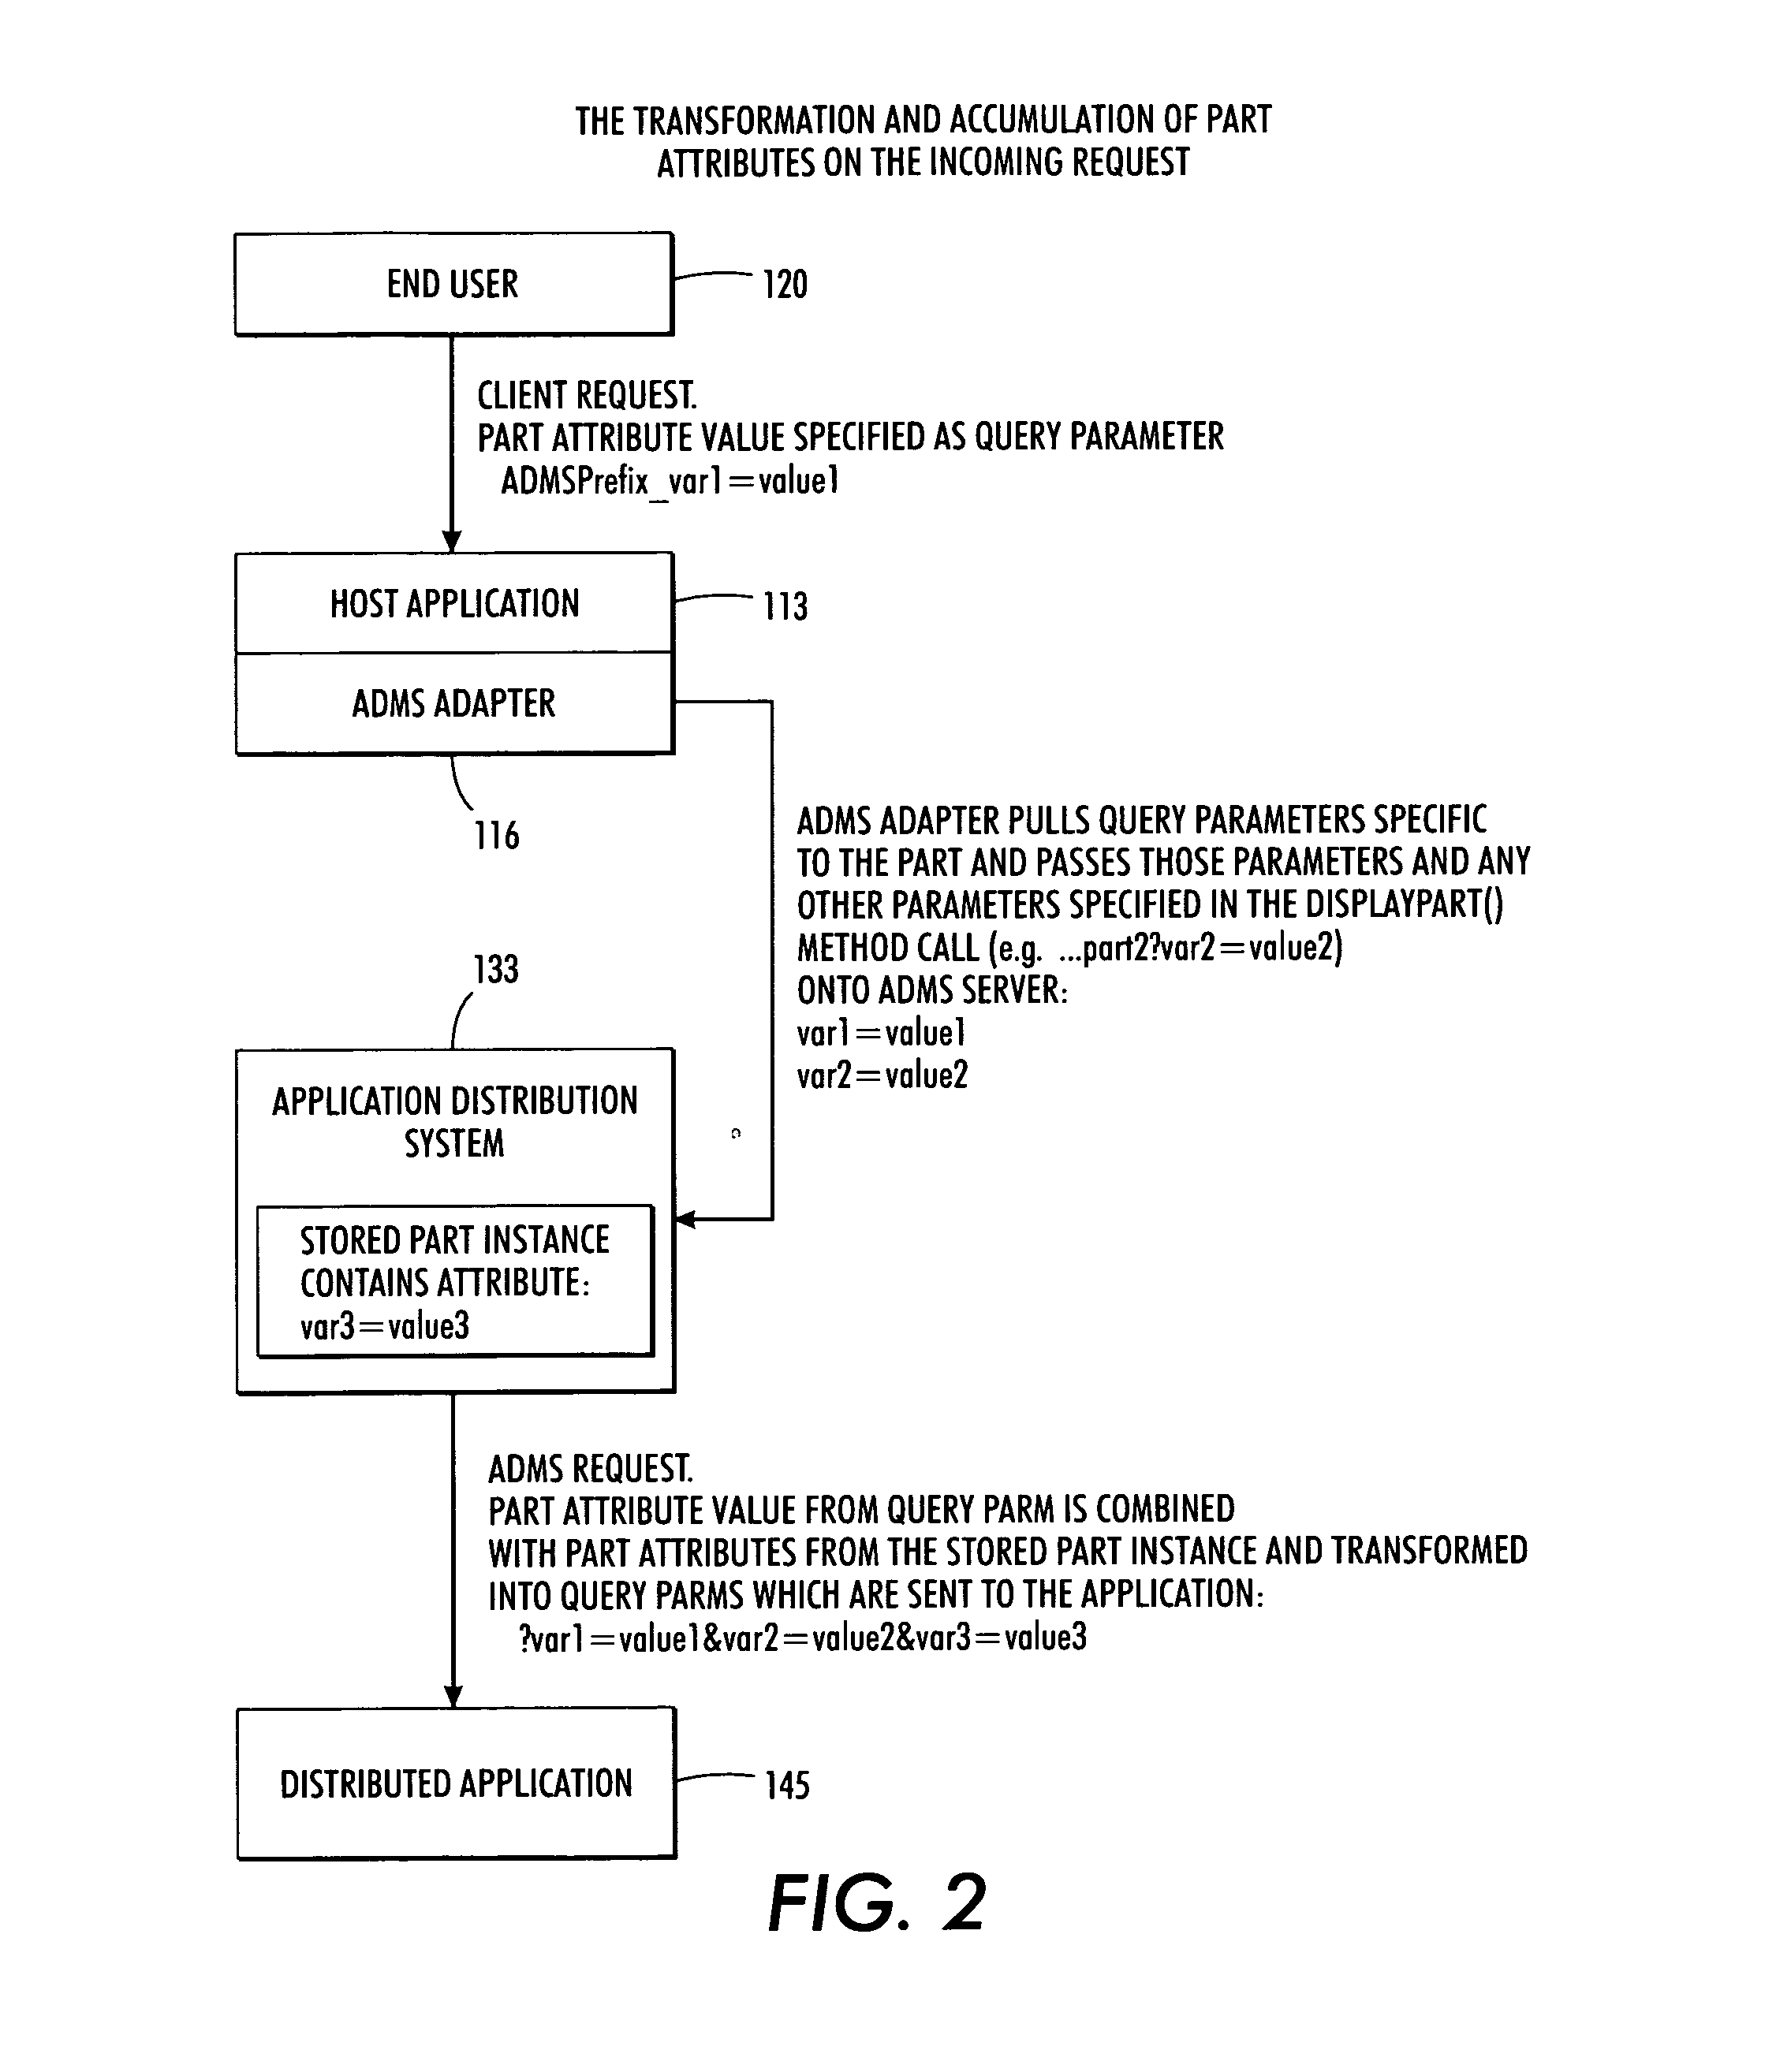 System and method for an application distribution and metrics system enabling the integration of distrubuted applications into host applications and the monetizing of distributed applications